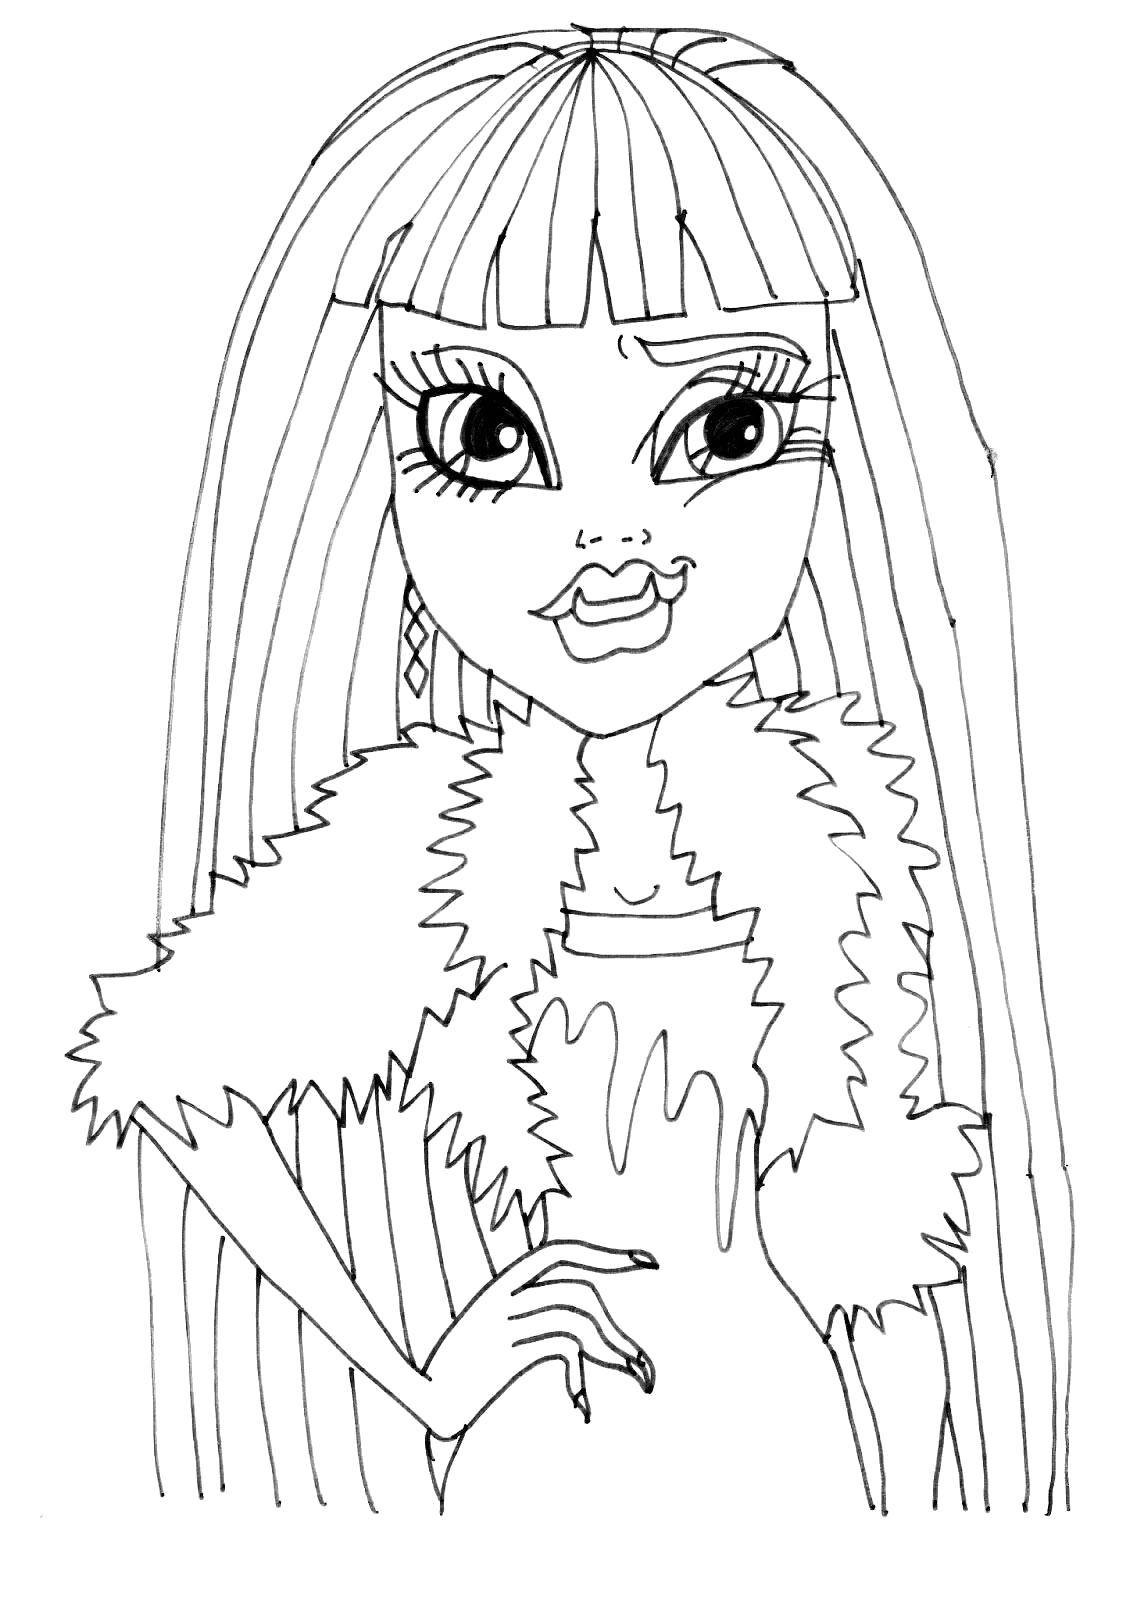 Coloring The cunning monsters. Category monster high. Tags:  Monster High.